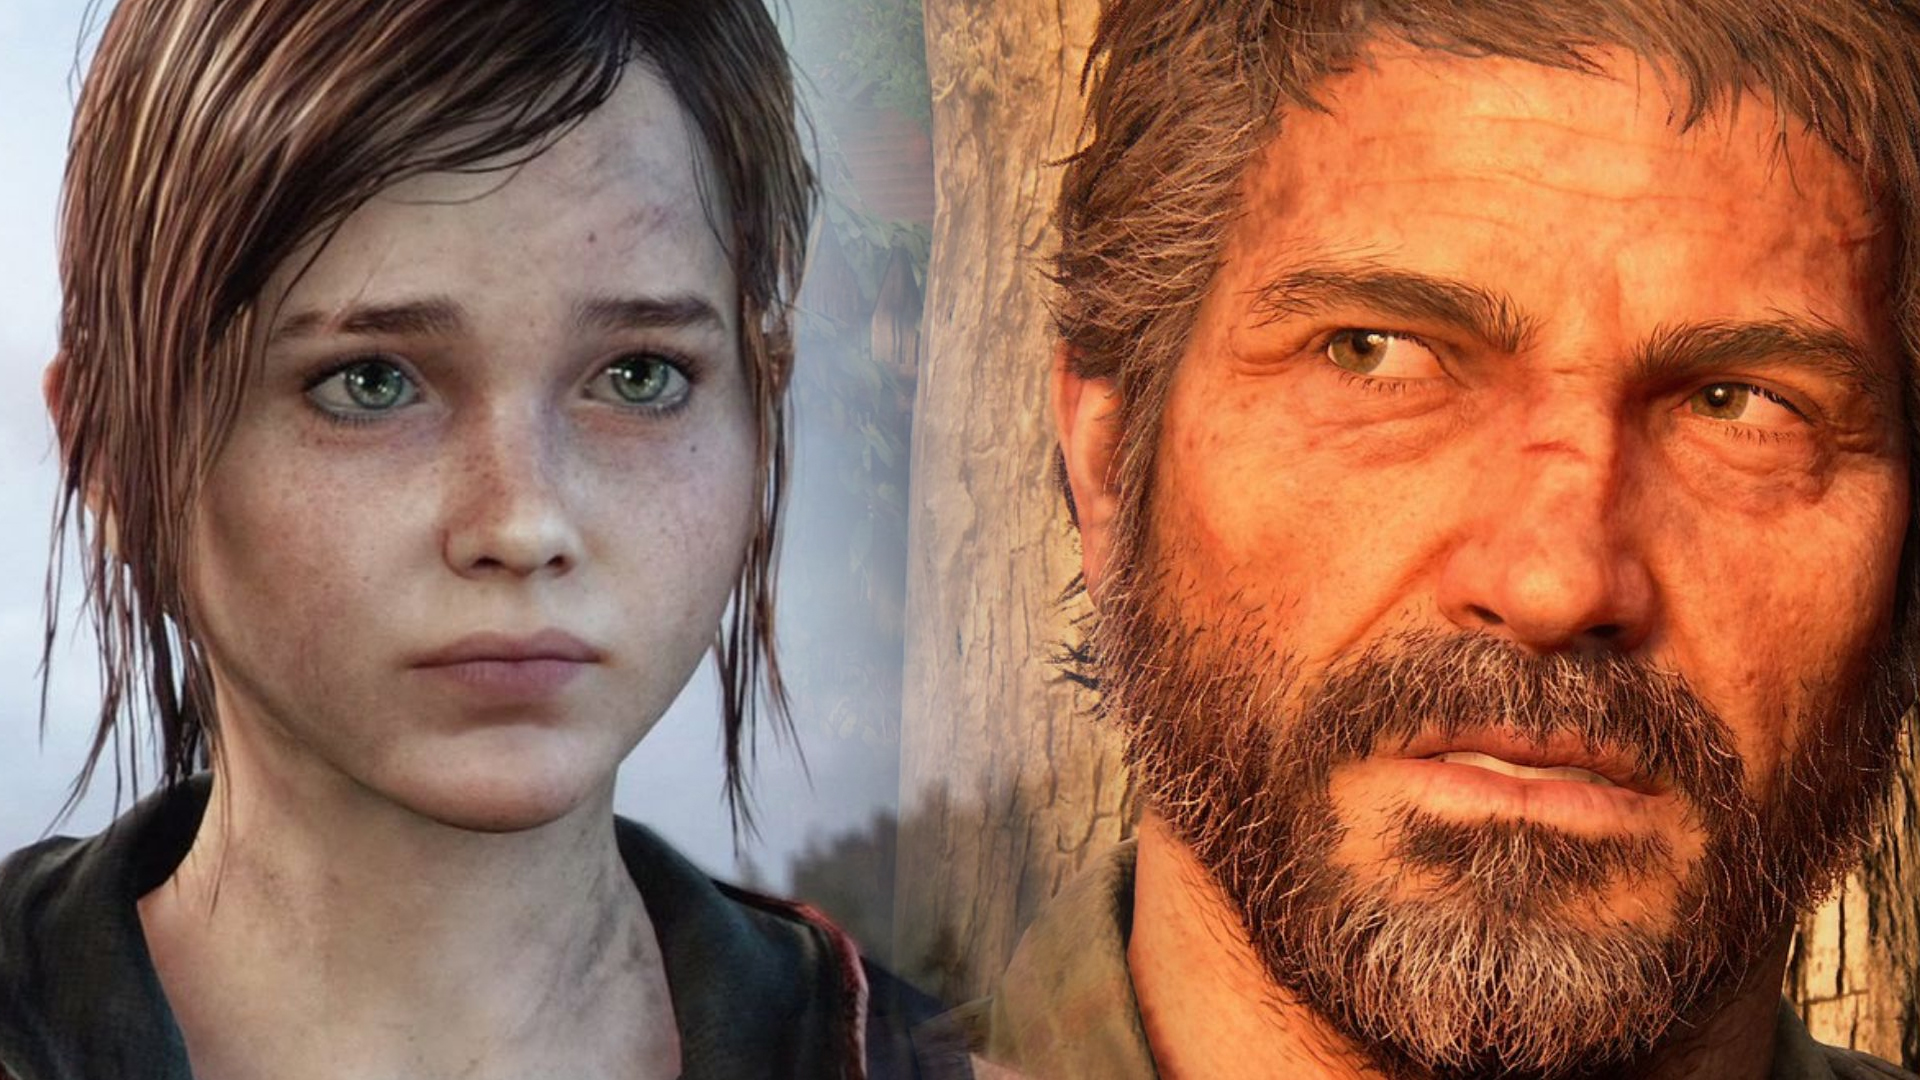 HBO - No matter how hard you try, you can't escape your past. Troy Baker  and Ashley Johnson, the iconic voices behind Joel and Ellie, have been cast  in #TheLastofUs as different